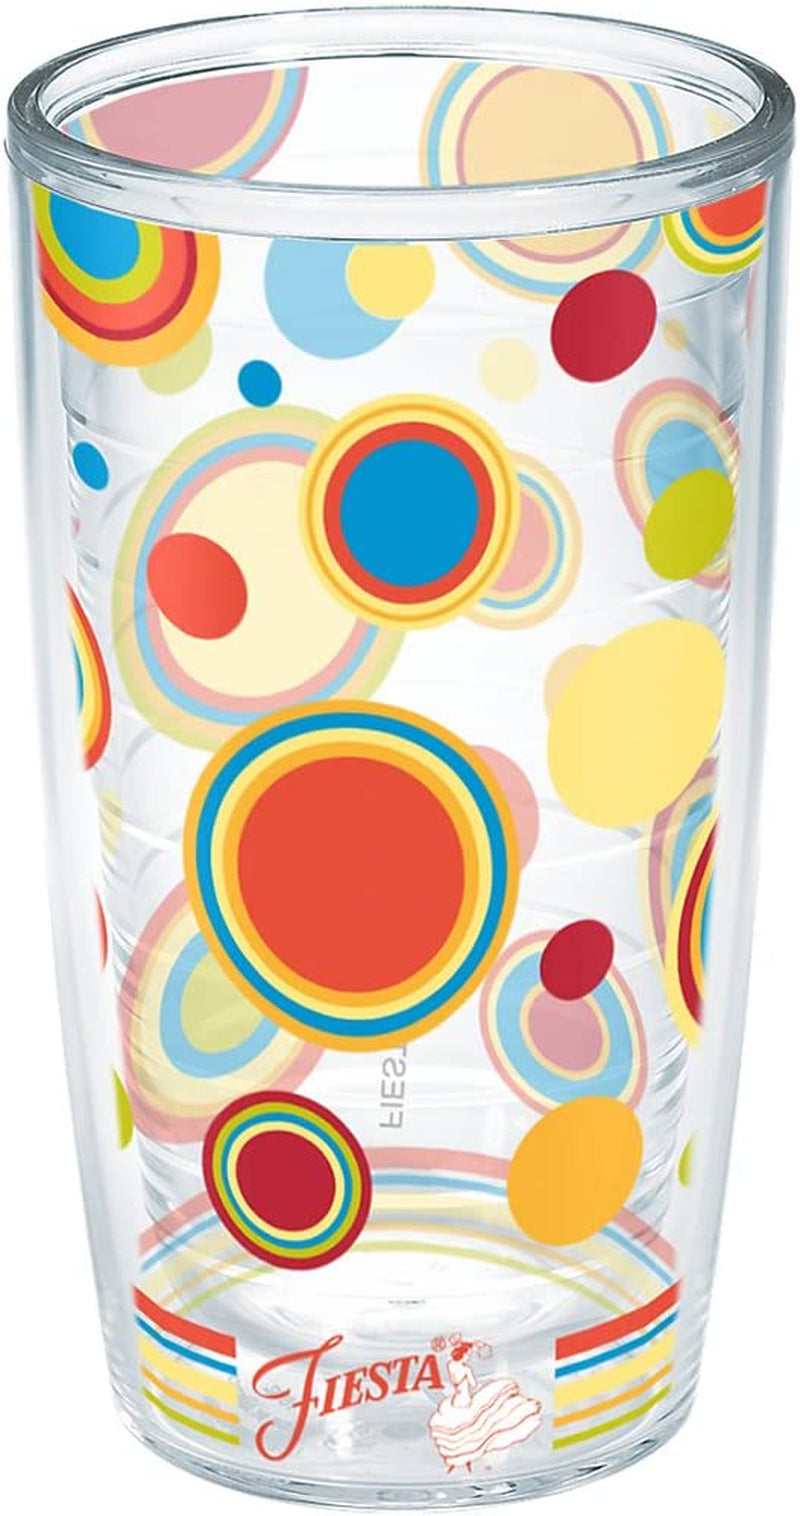 Tervis Made in USA Double Walled Fiesta Insulated Tumbler Cup Keeps Drinks Cold & Hot, 16Oz - 4Pk, Poppy Dots Home & Garden > Kitchen & Dining > Tableware > Drinkware Tervis Classic - Unlidded 16oz 